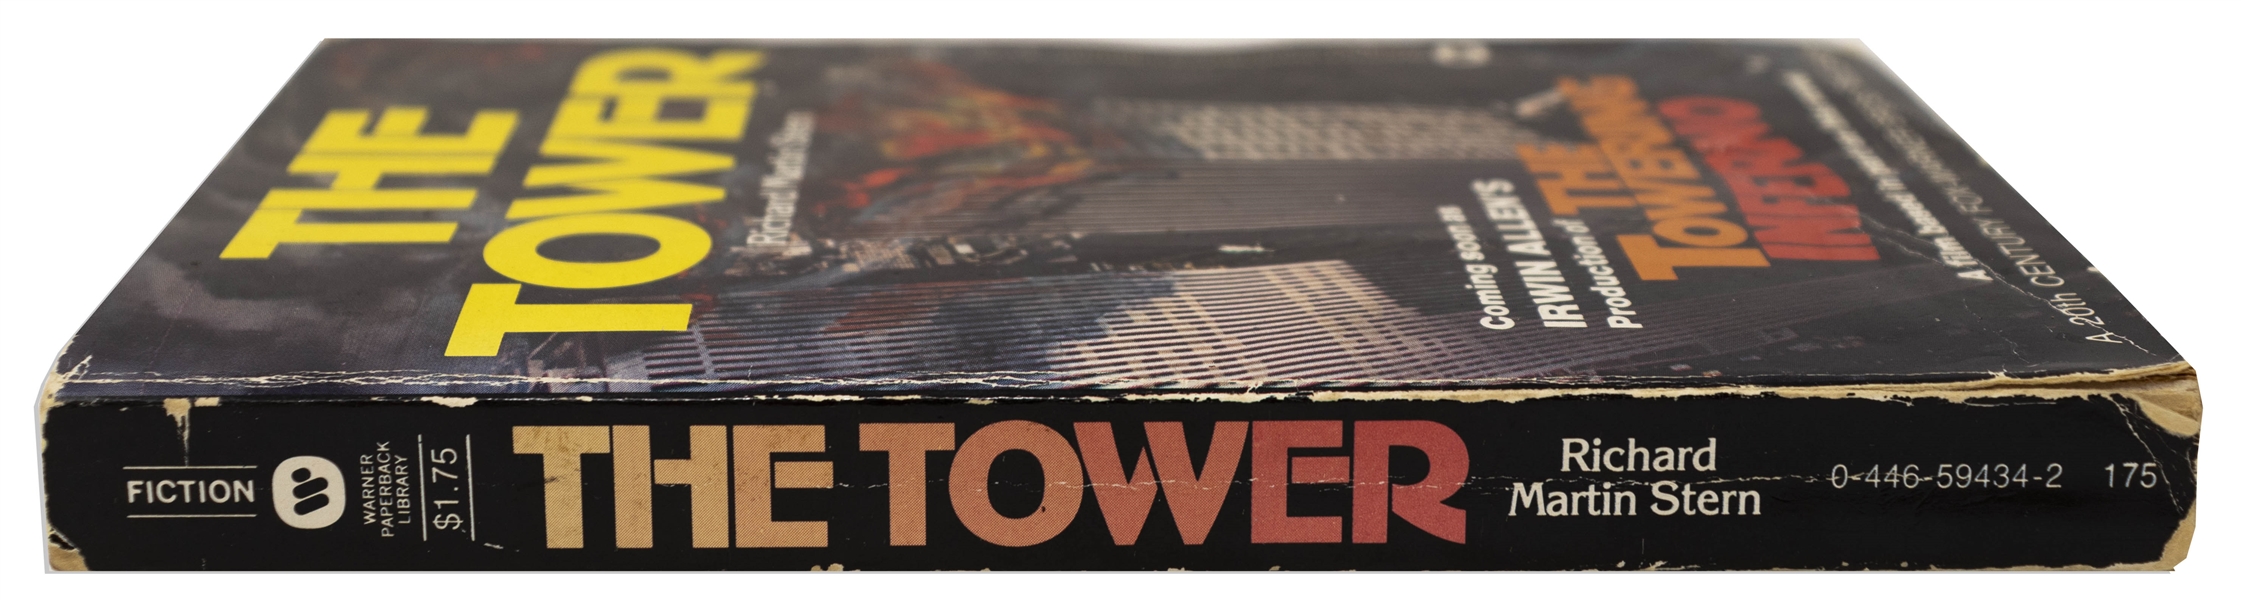 Steve McQueen Signed Copy of ''The Tower'', Adapted Into the Hit Movie ''The Towering Inferno'' Starring McQueen -- Also Signed by Ali MacGraw